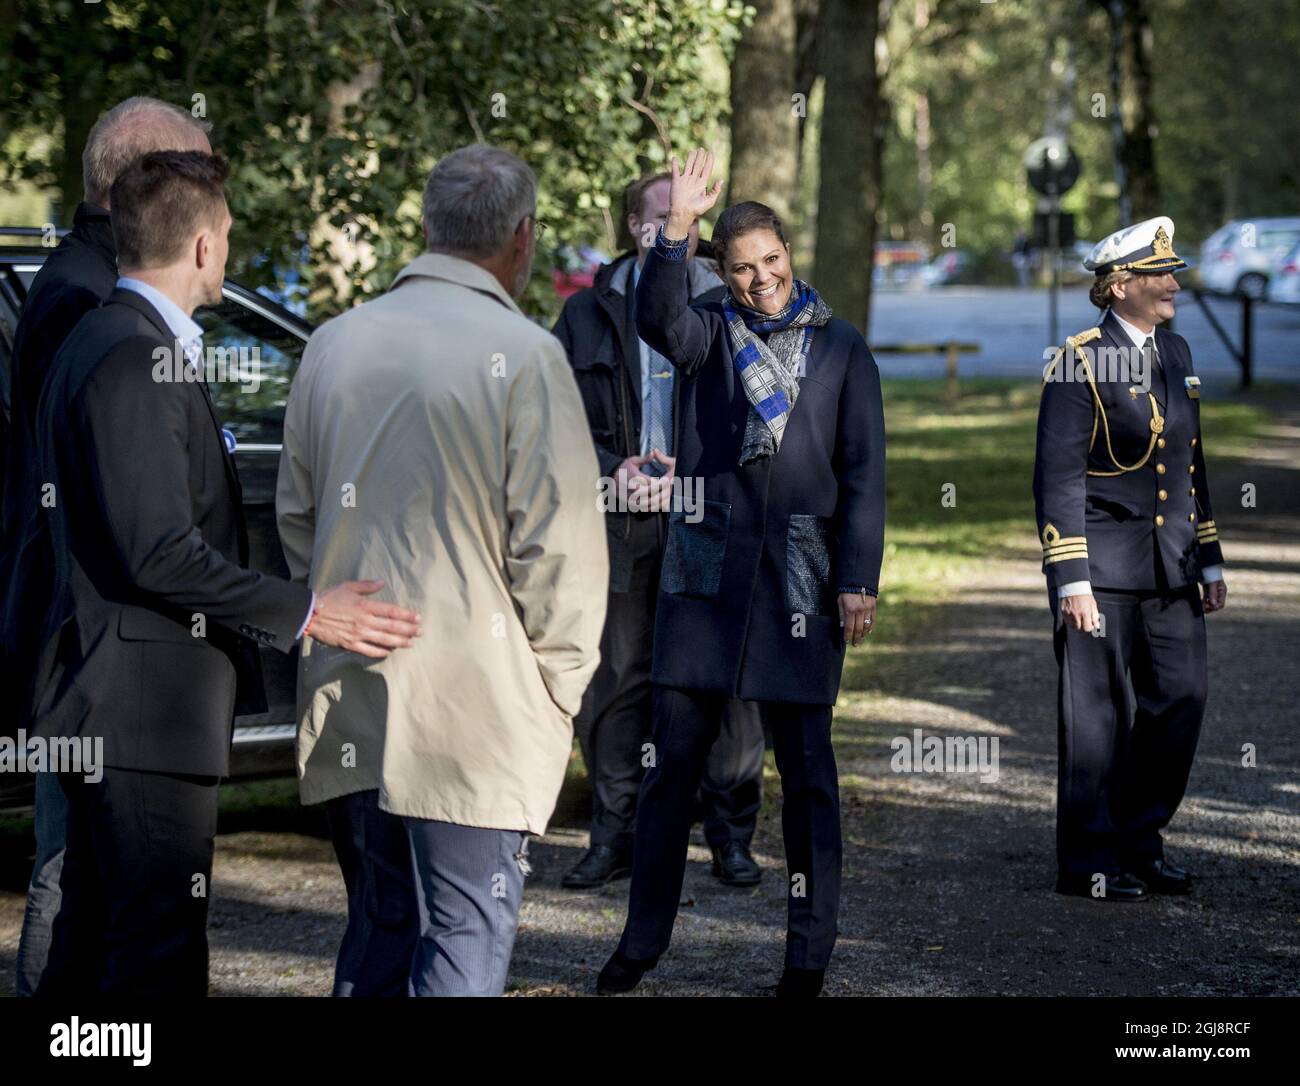 BLEKINGE 2014-09-25 Crown Princess Victoria is seen during a visit to the county of Blekinge South Sweden, September 25, 2014. Victoria inaugurated the new national par Sterno and visited a science centre. Foto: Tomas LePrince / KvP / TT / kod 7136 ** OUT SWEDEN OUT**  Stock Photo